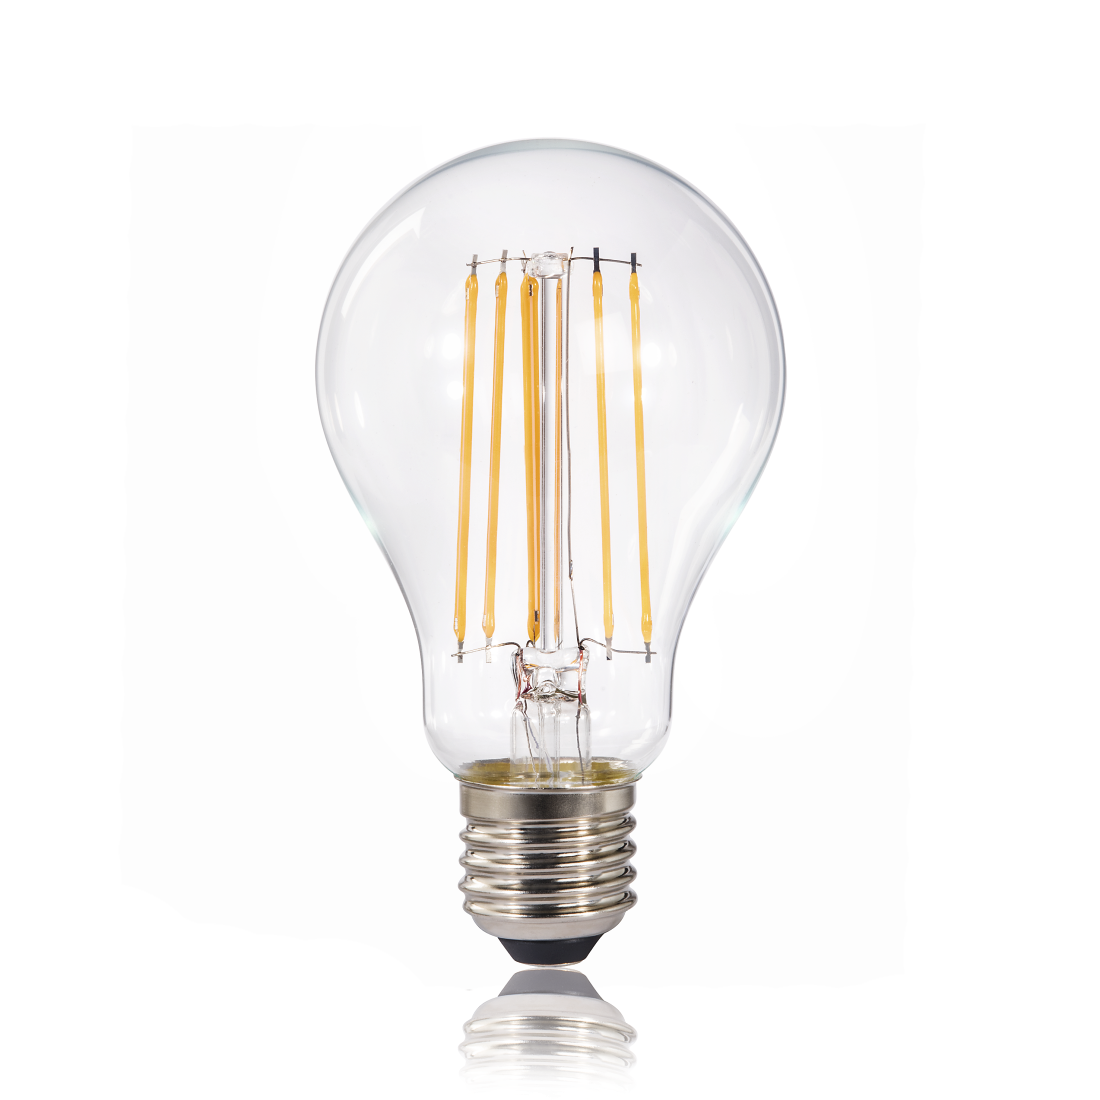 abx2 High-Res Image 2 - Xavax, LED Filament, E27, 1521 lm Replaces 100W, Incand. Bulb, warm white, clear